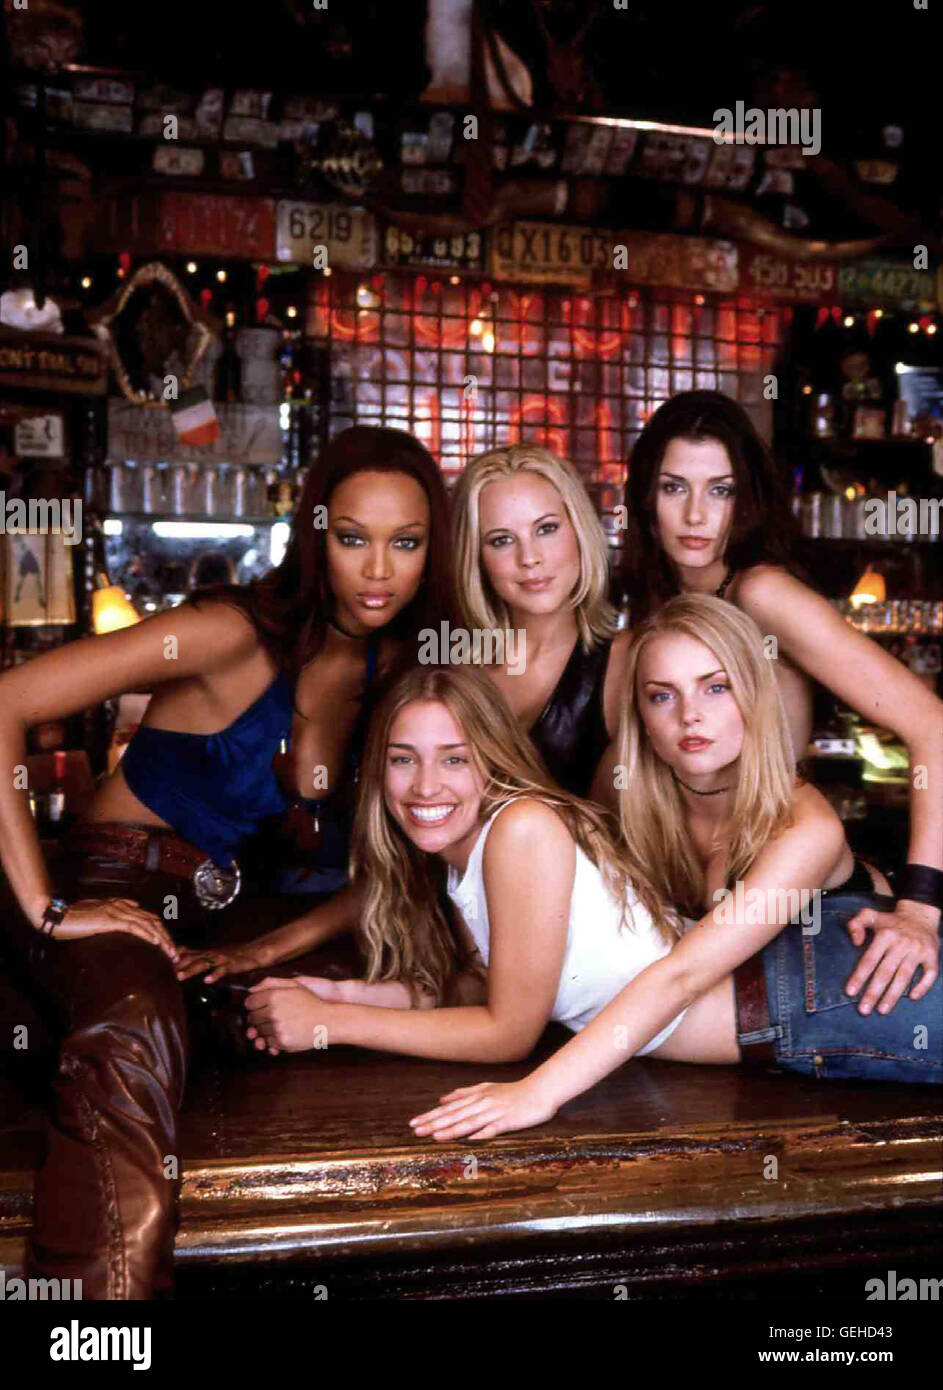 Tyra Banks, Piper Perabo, Maria Bello, Isabella Miko, Bridget Moynahan Die Damen des Hauses kennen nur ein Programm: Let's party! *** Local Caption *** 2000, Coyote Ugly, Coyote Ugly Stock Photo